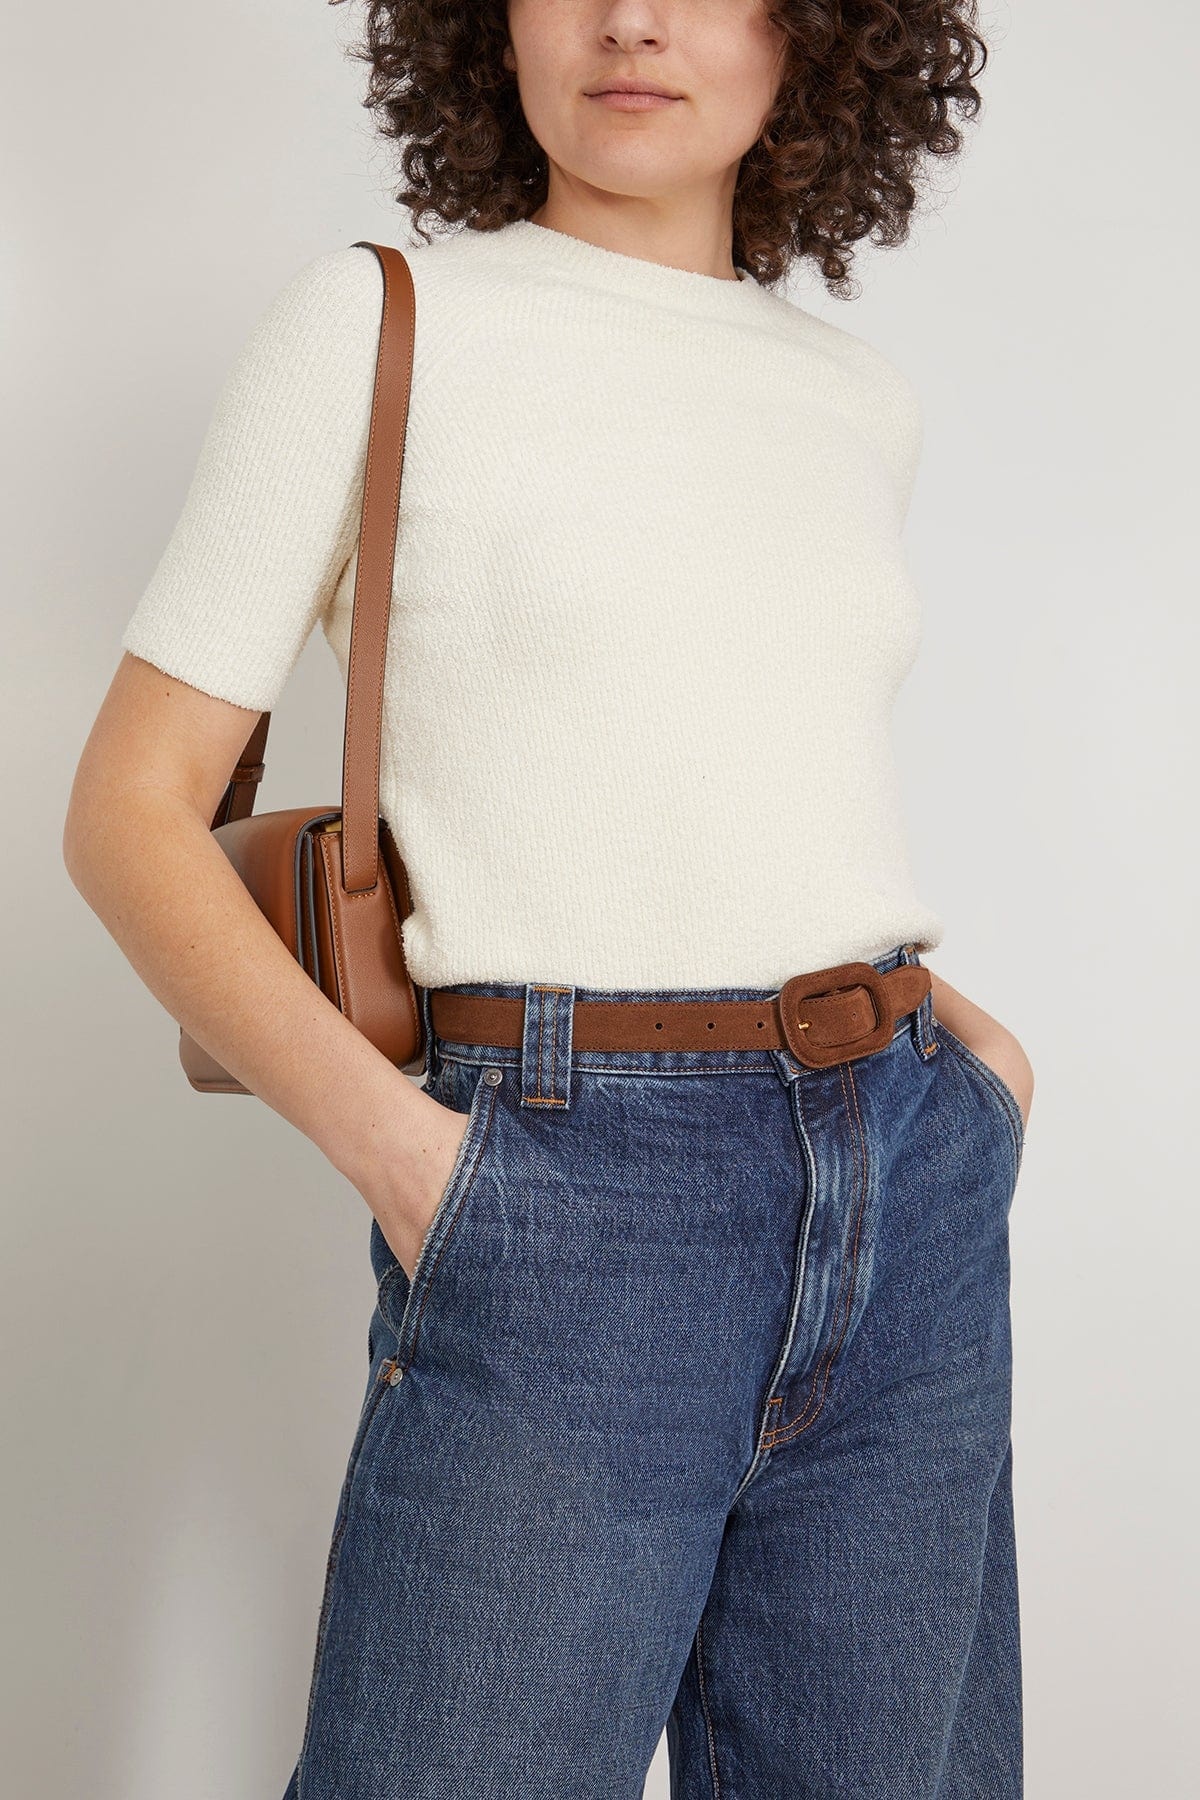 Covered Buckle Belt in Brown Suede - 2